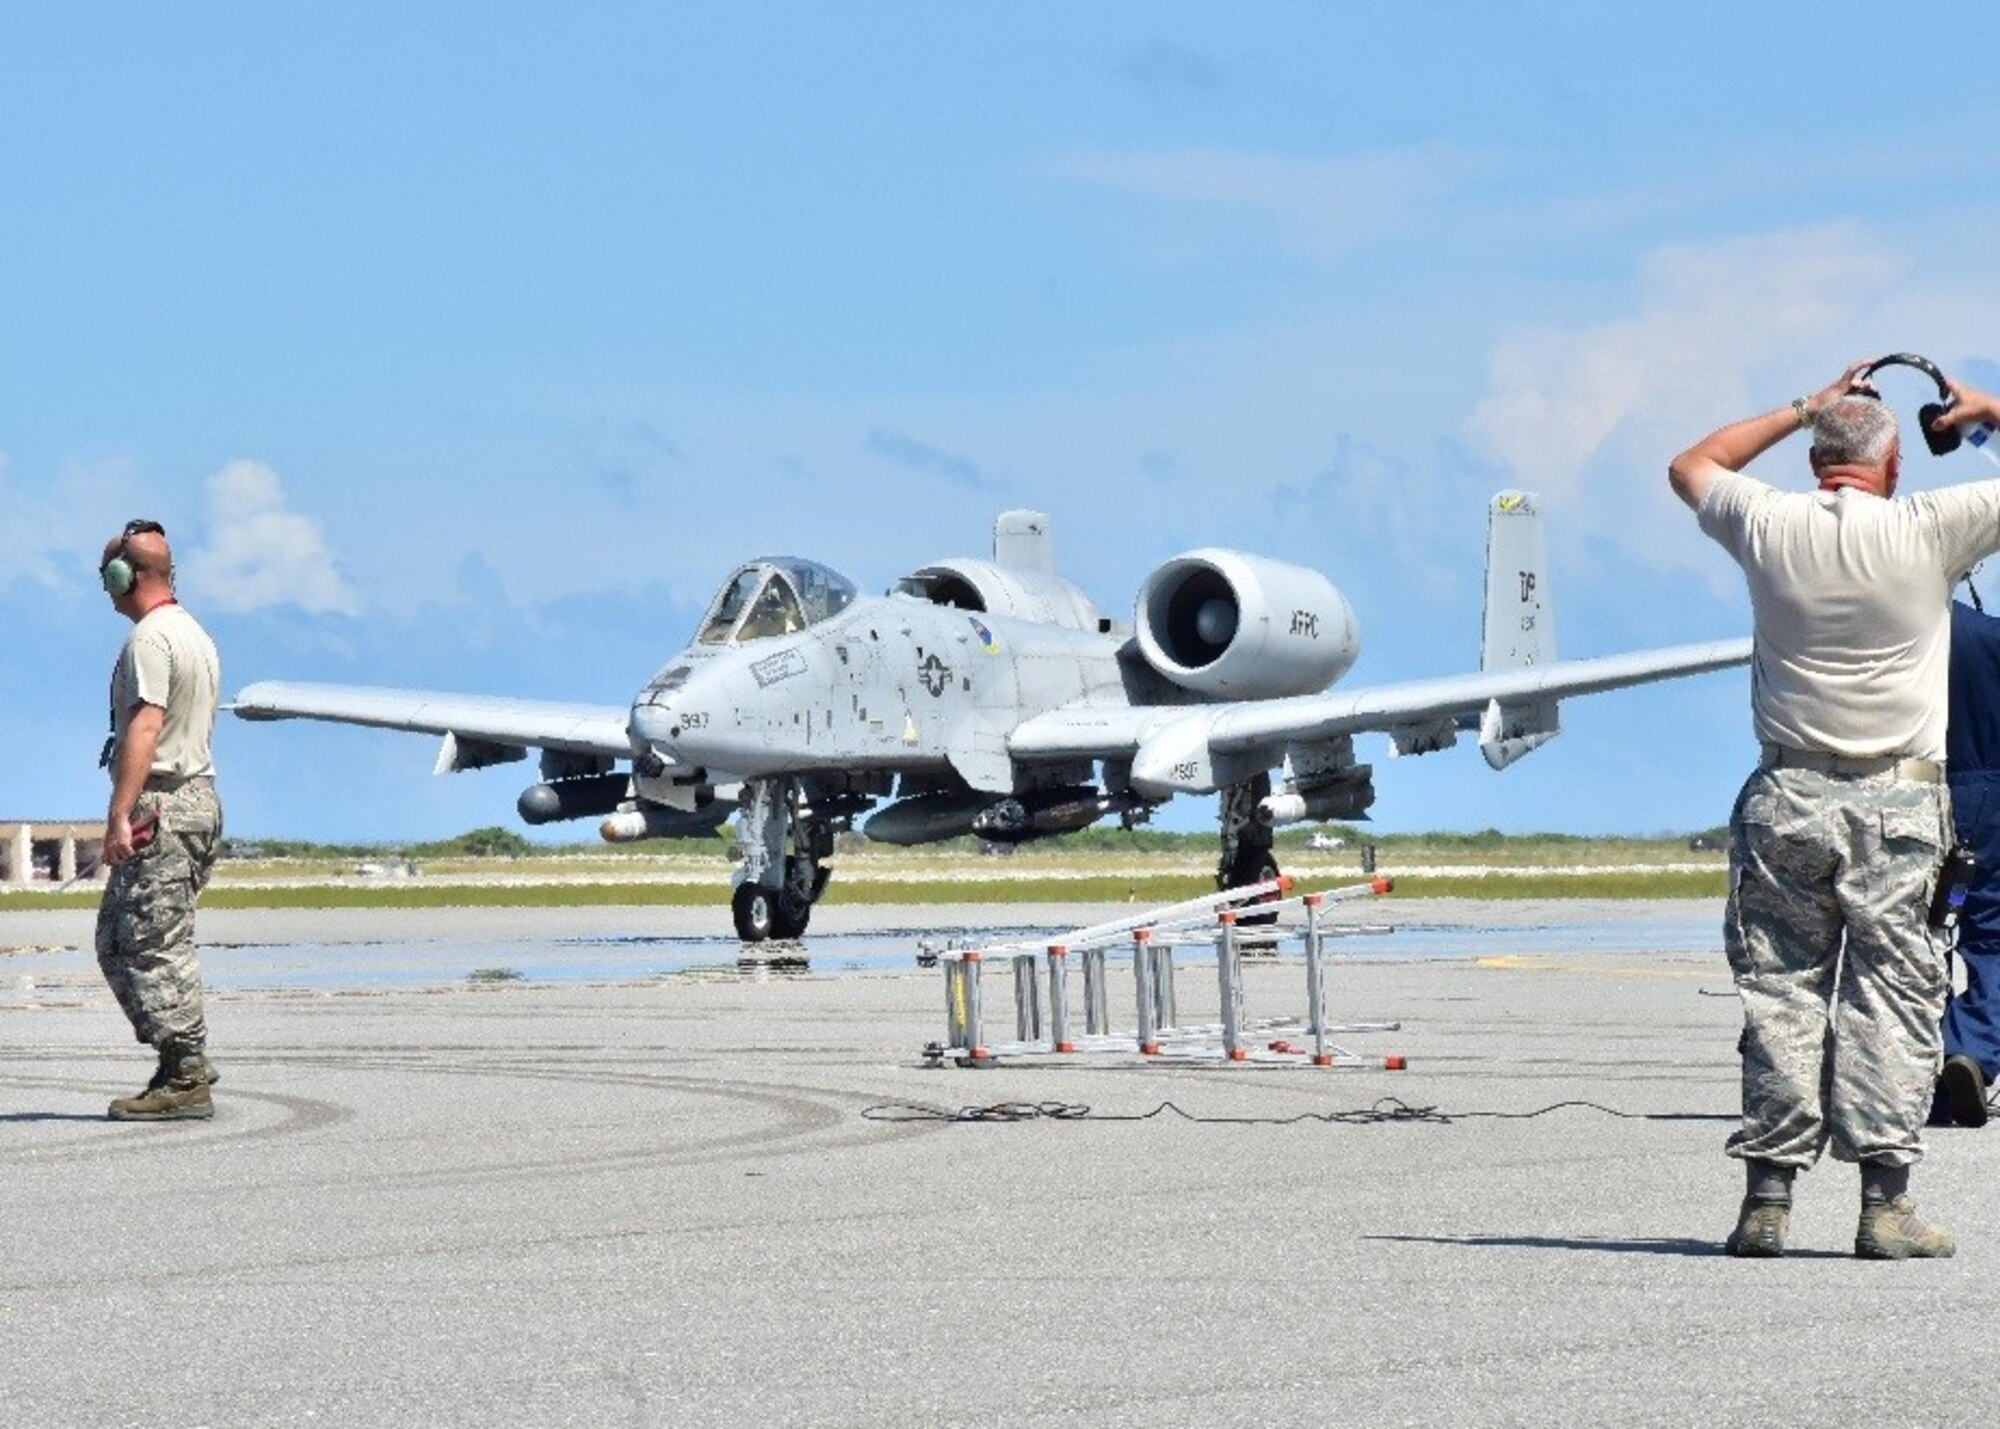 Airmen form the 924th Maintenance Squadron prepare for the arrival of A-10 Thunberbolt II July 16 in preparation for their annual tour at Patrick Air Force Base, Fla. Approximately 200 Airmen from the 924th will conduct their annual tour at Patrick AFB, allowing the unit to gain experience and train with the 920th Rescue Wing. (U.S. Air Force photo by Tech. Sgt. Louis Vega Jr.)